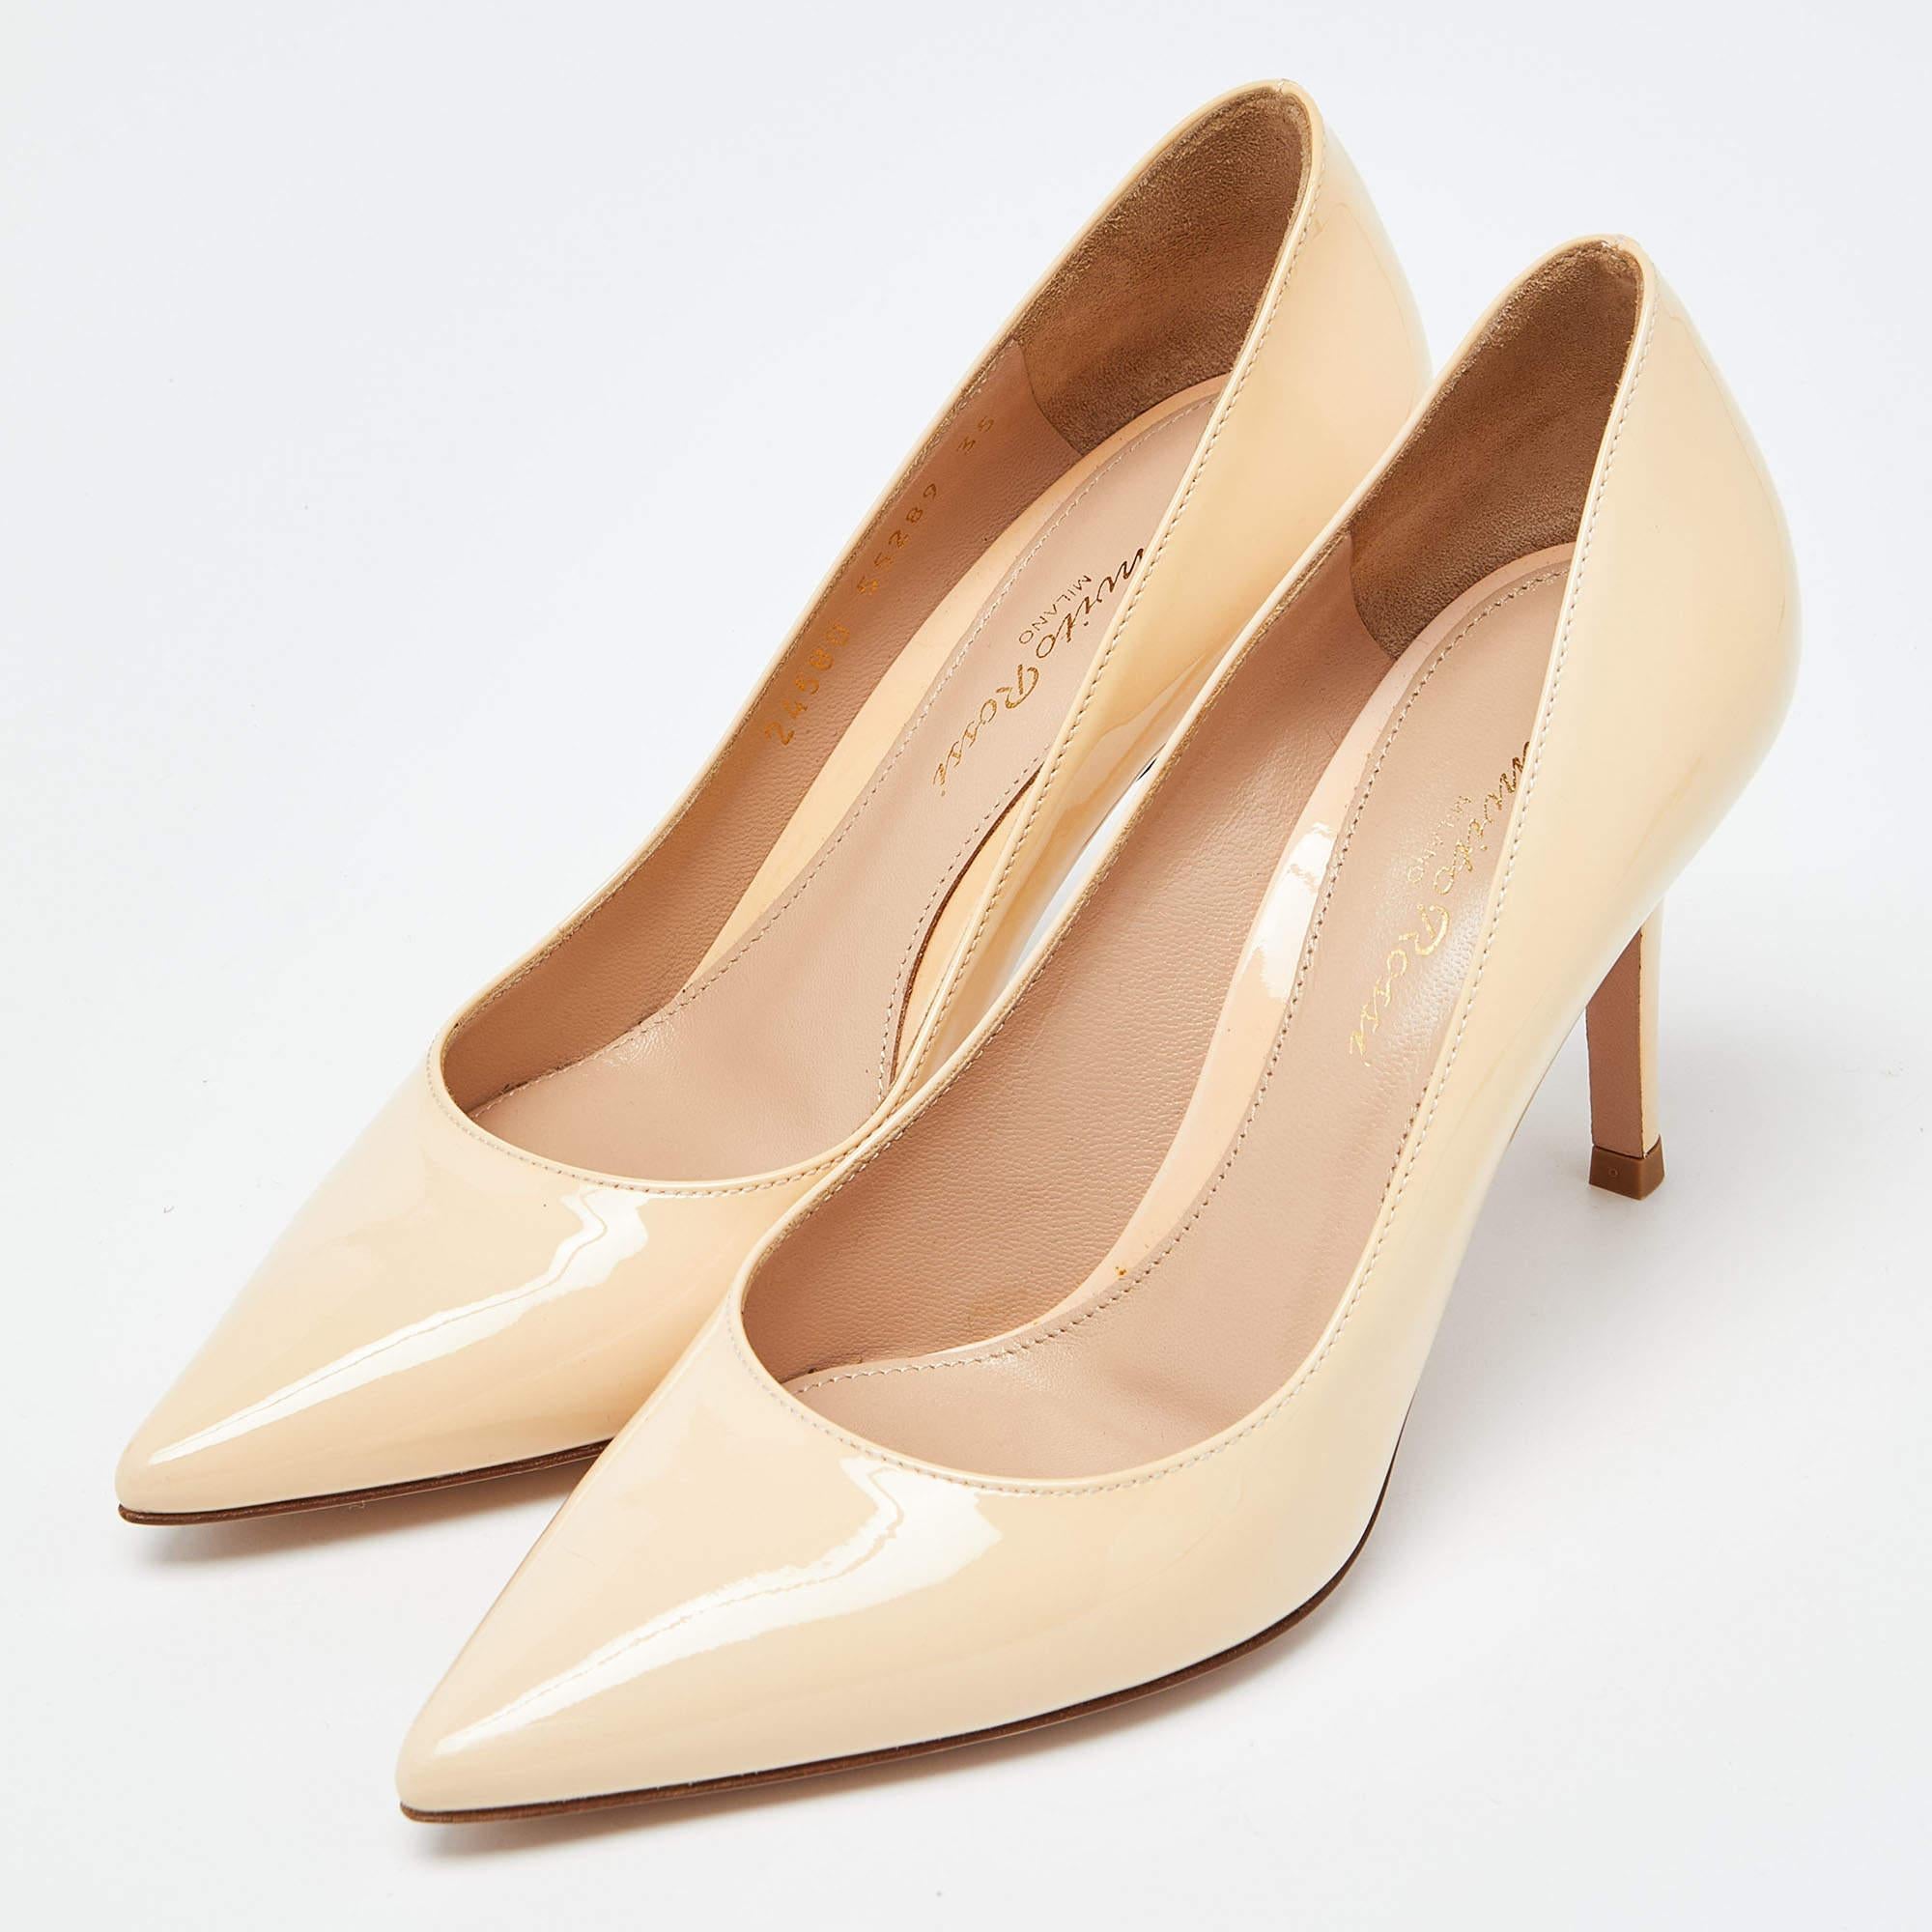 Gianvito Rossi Beige Patent Leather Gianvito 85 Pointed Toe Pumps Size 35 For Sale 4